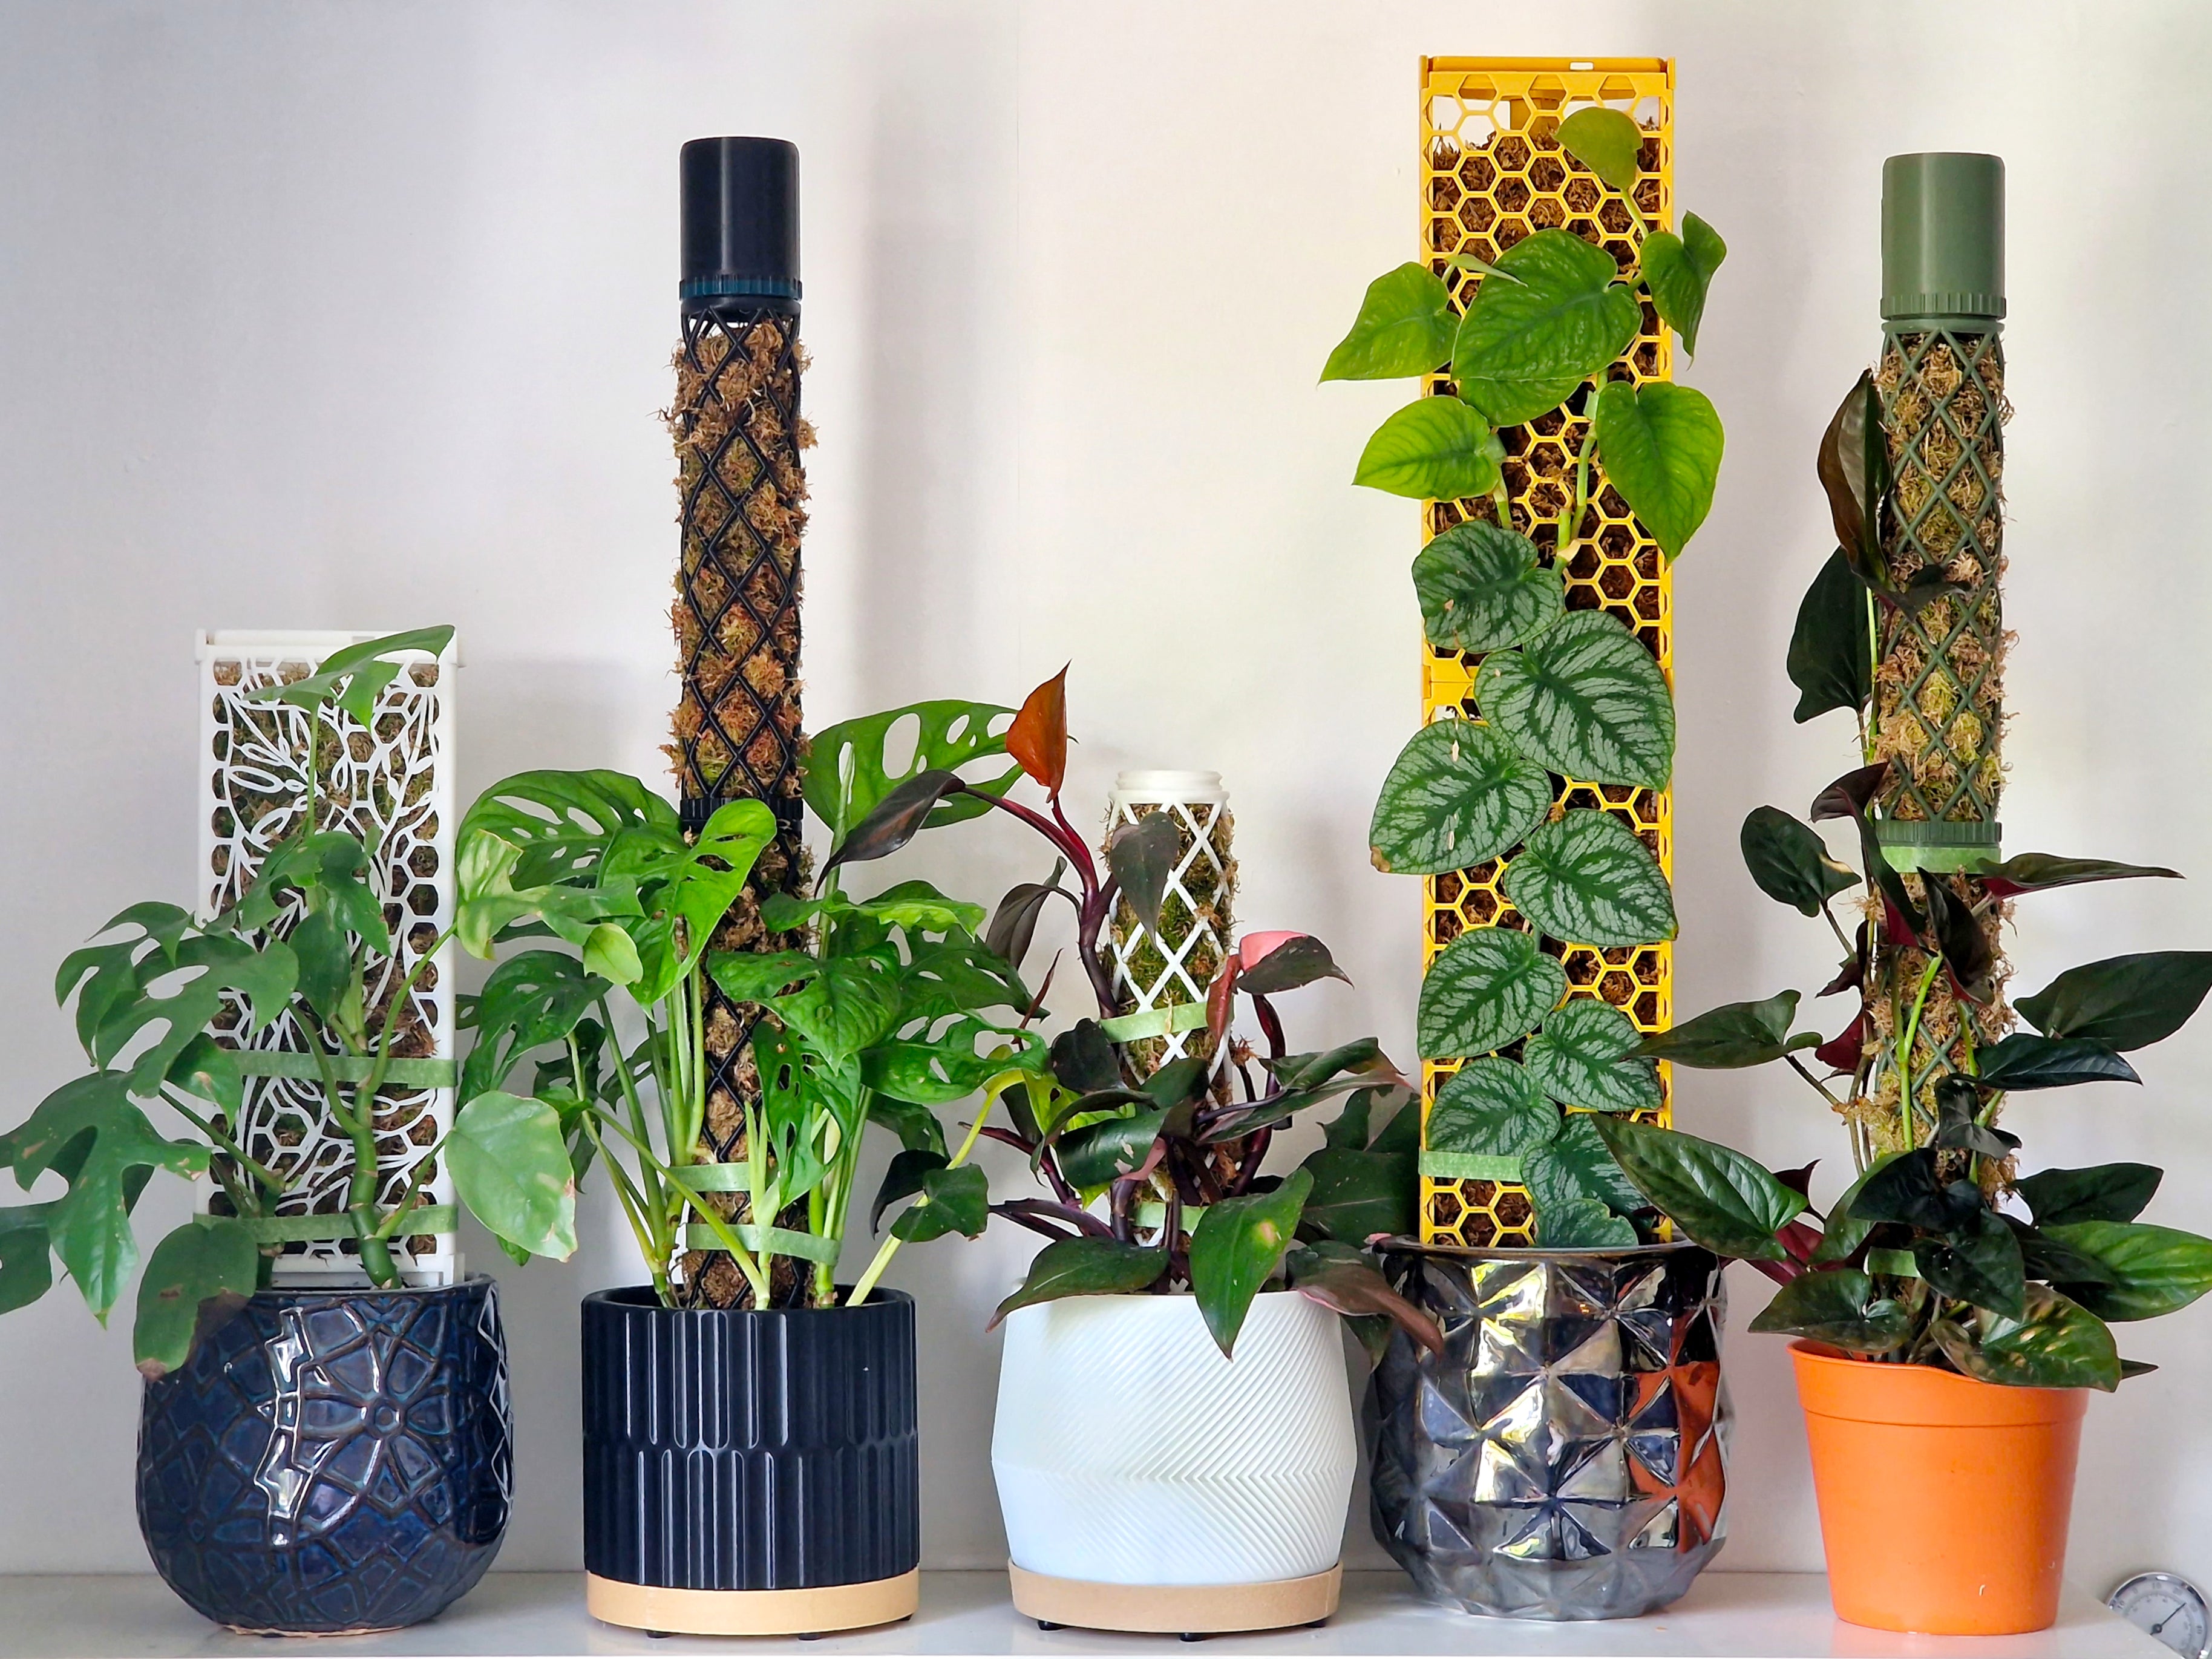 What size and style should I choose for my moss pole? – Mythos3Design